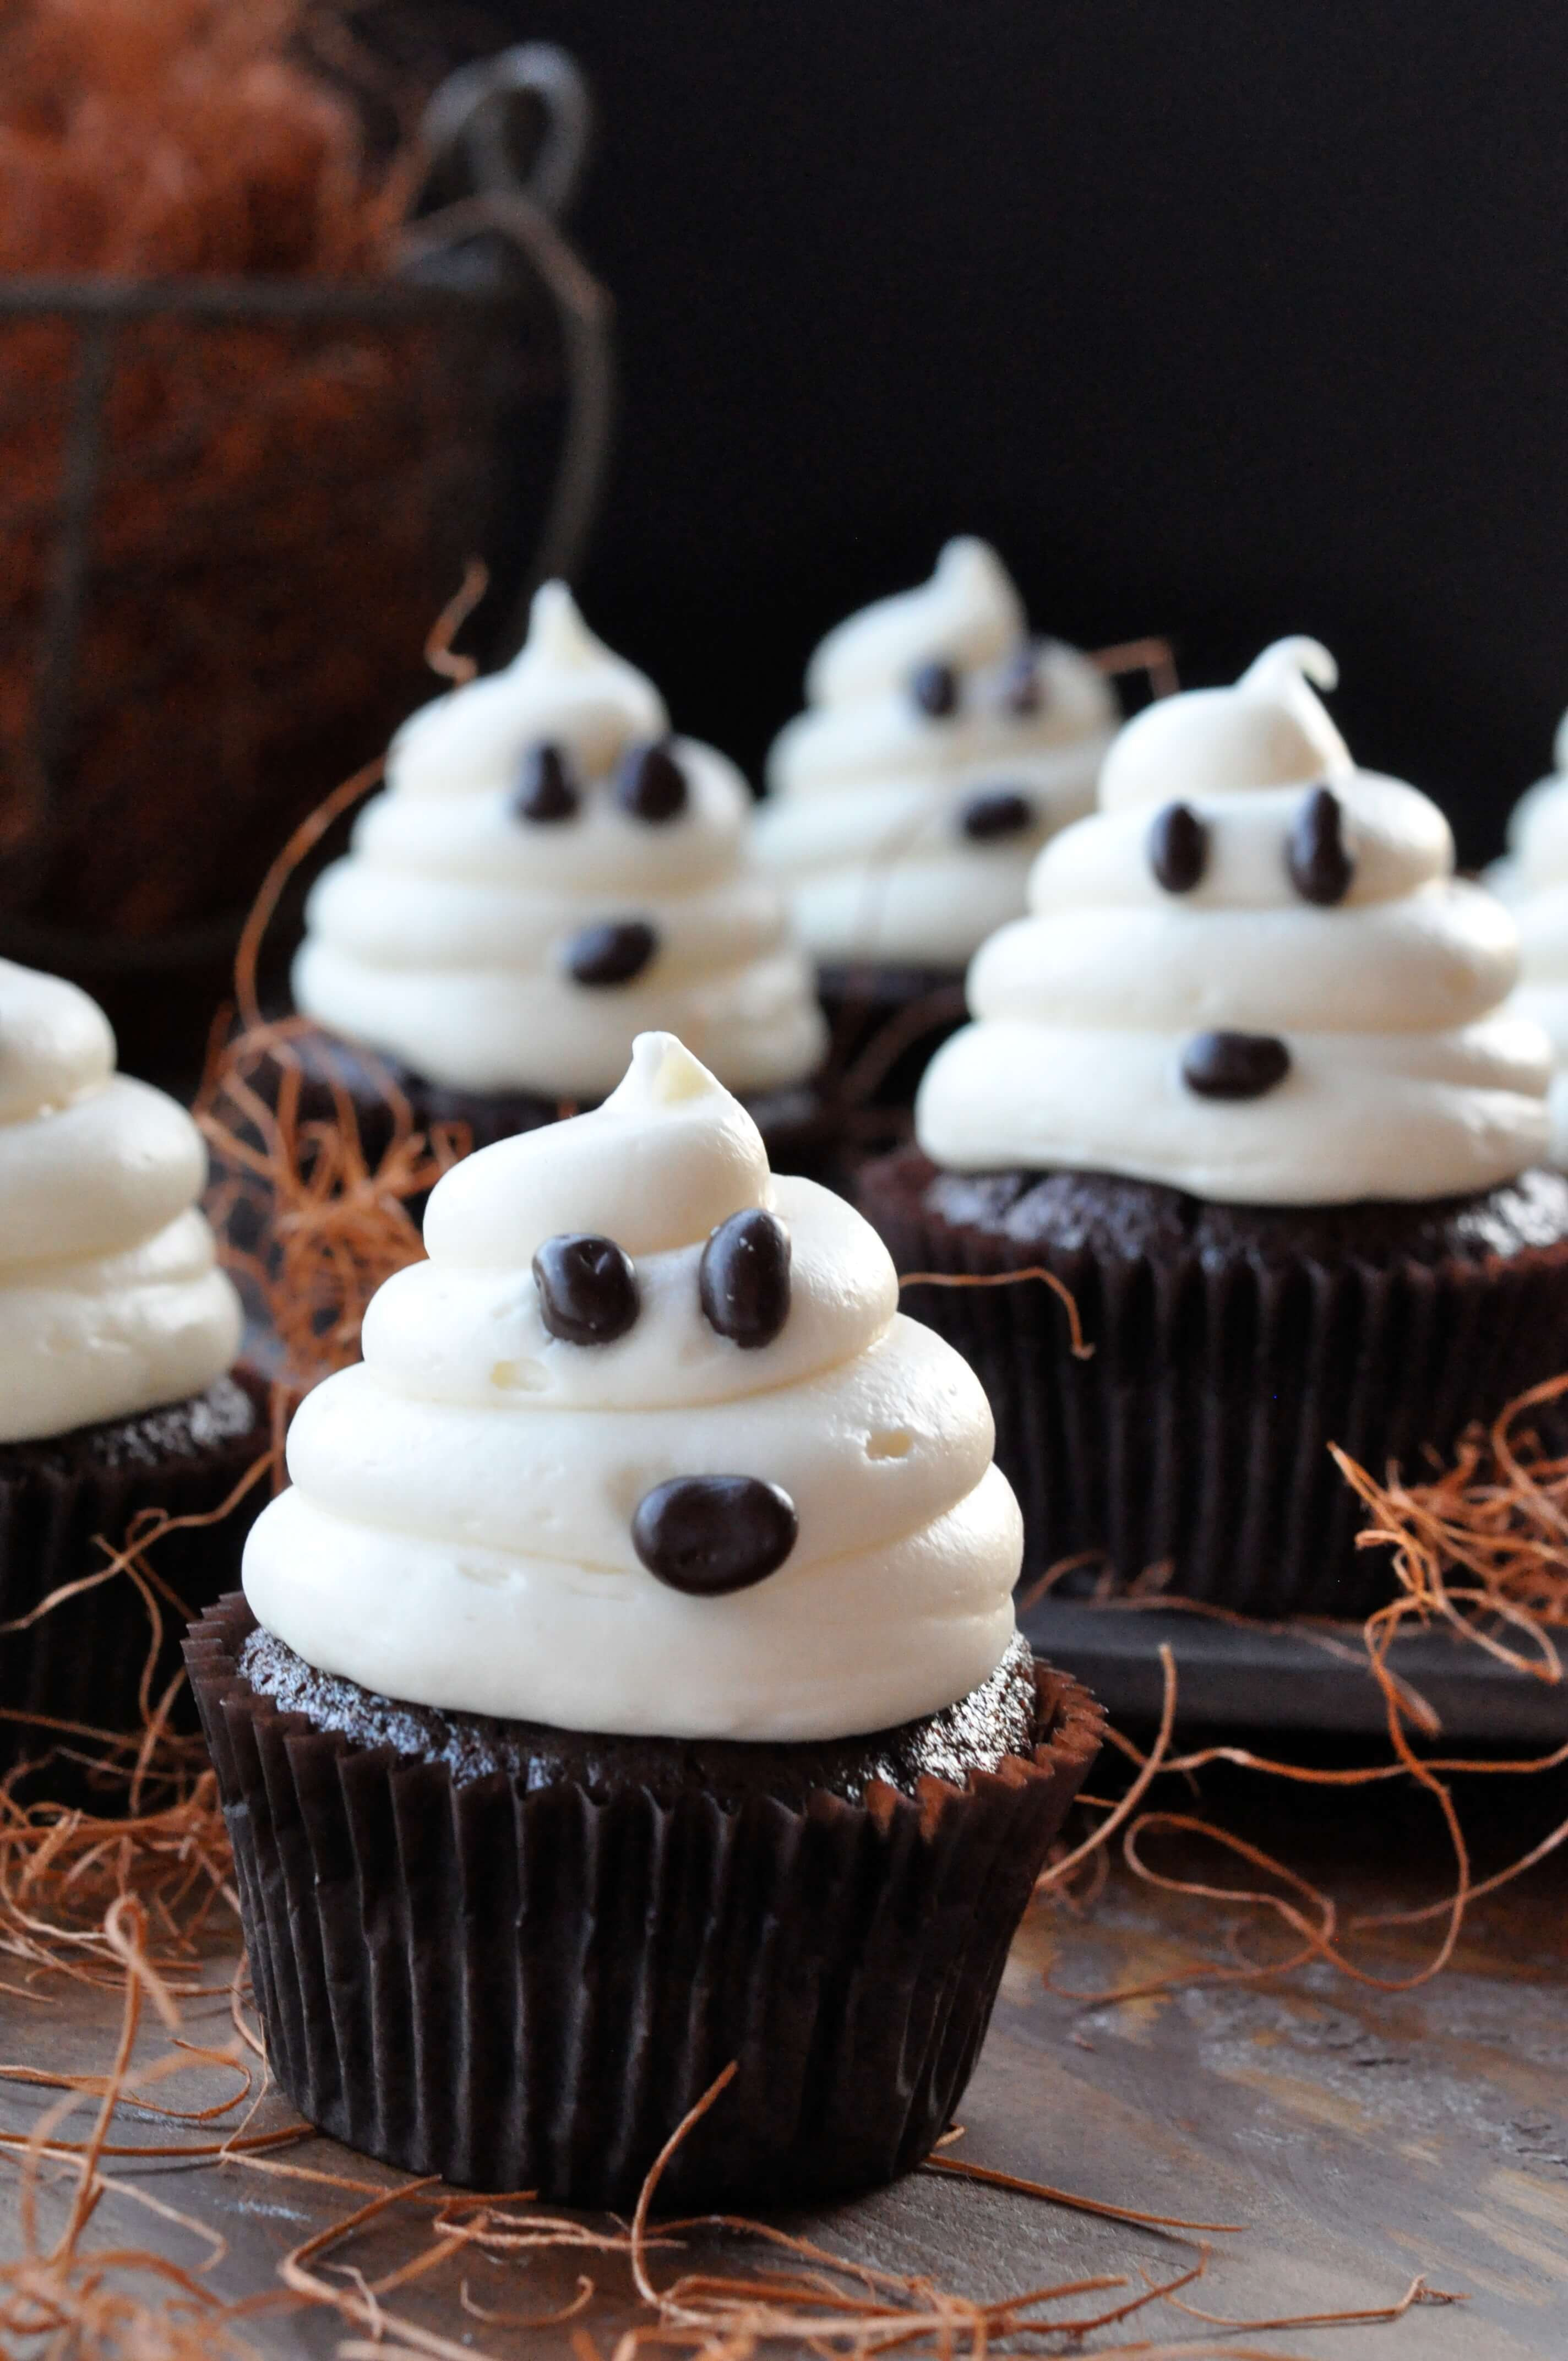 Homemade Halloween Cakes
 Halloween Ghosts on Carrot Cake Recipe—Fast and Easy